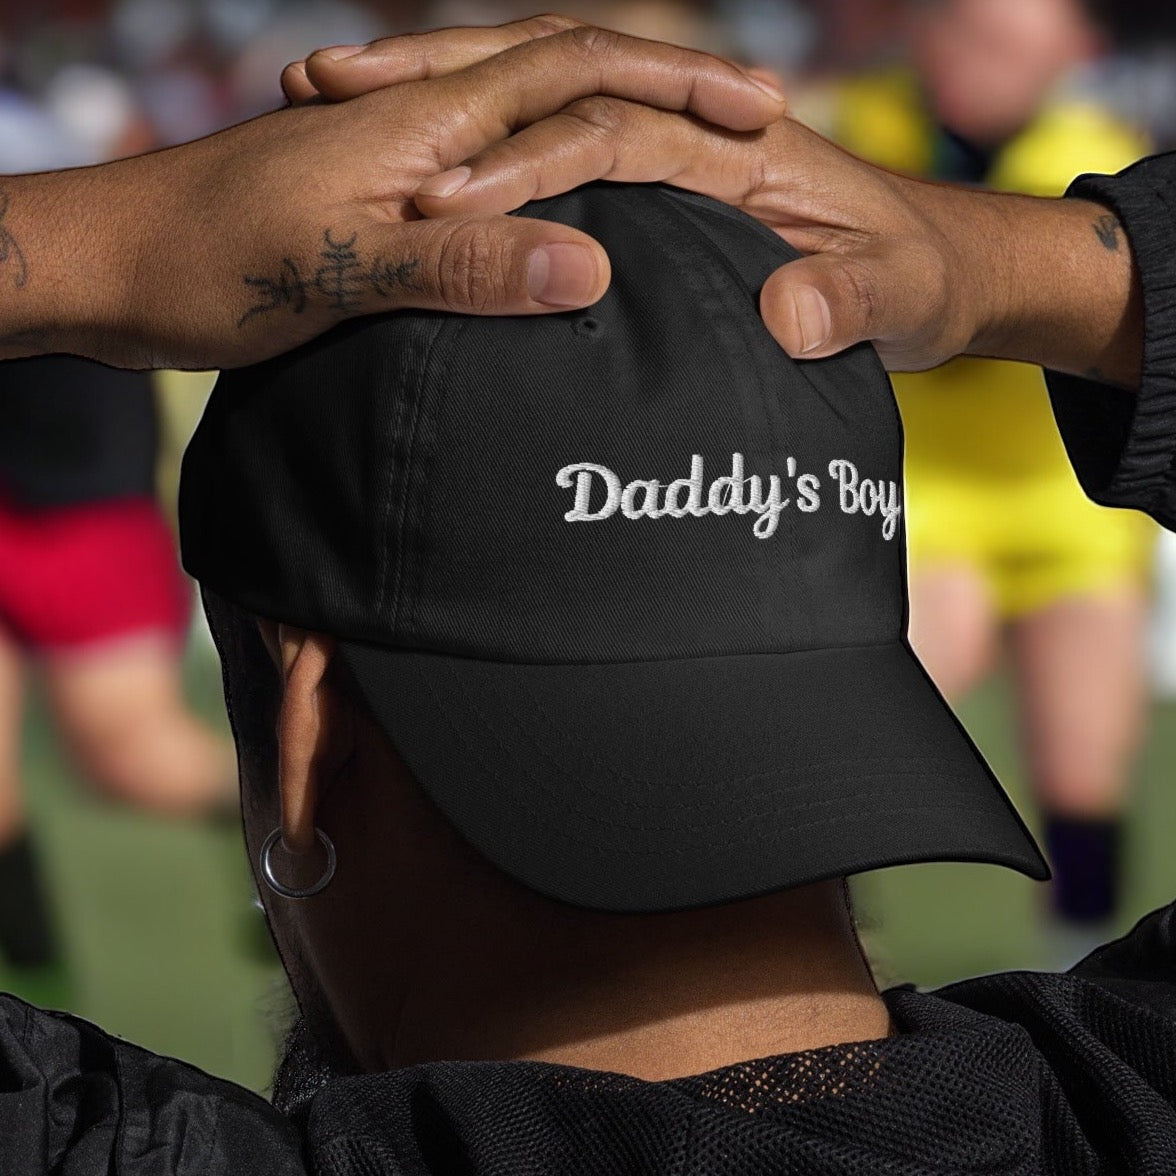 Daddy's Boy Embroidered Cap - Ball Cap - Twisted Jezebel